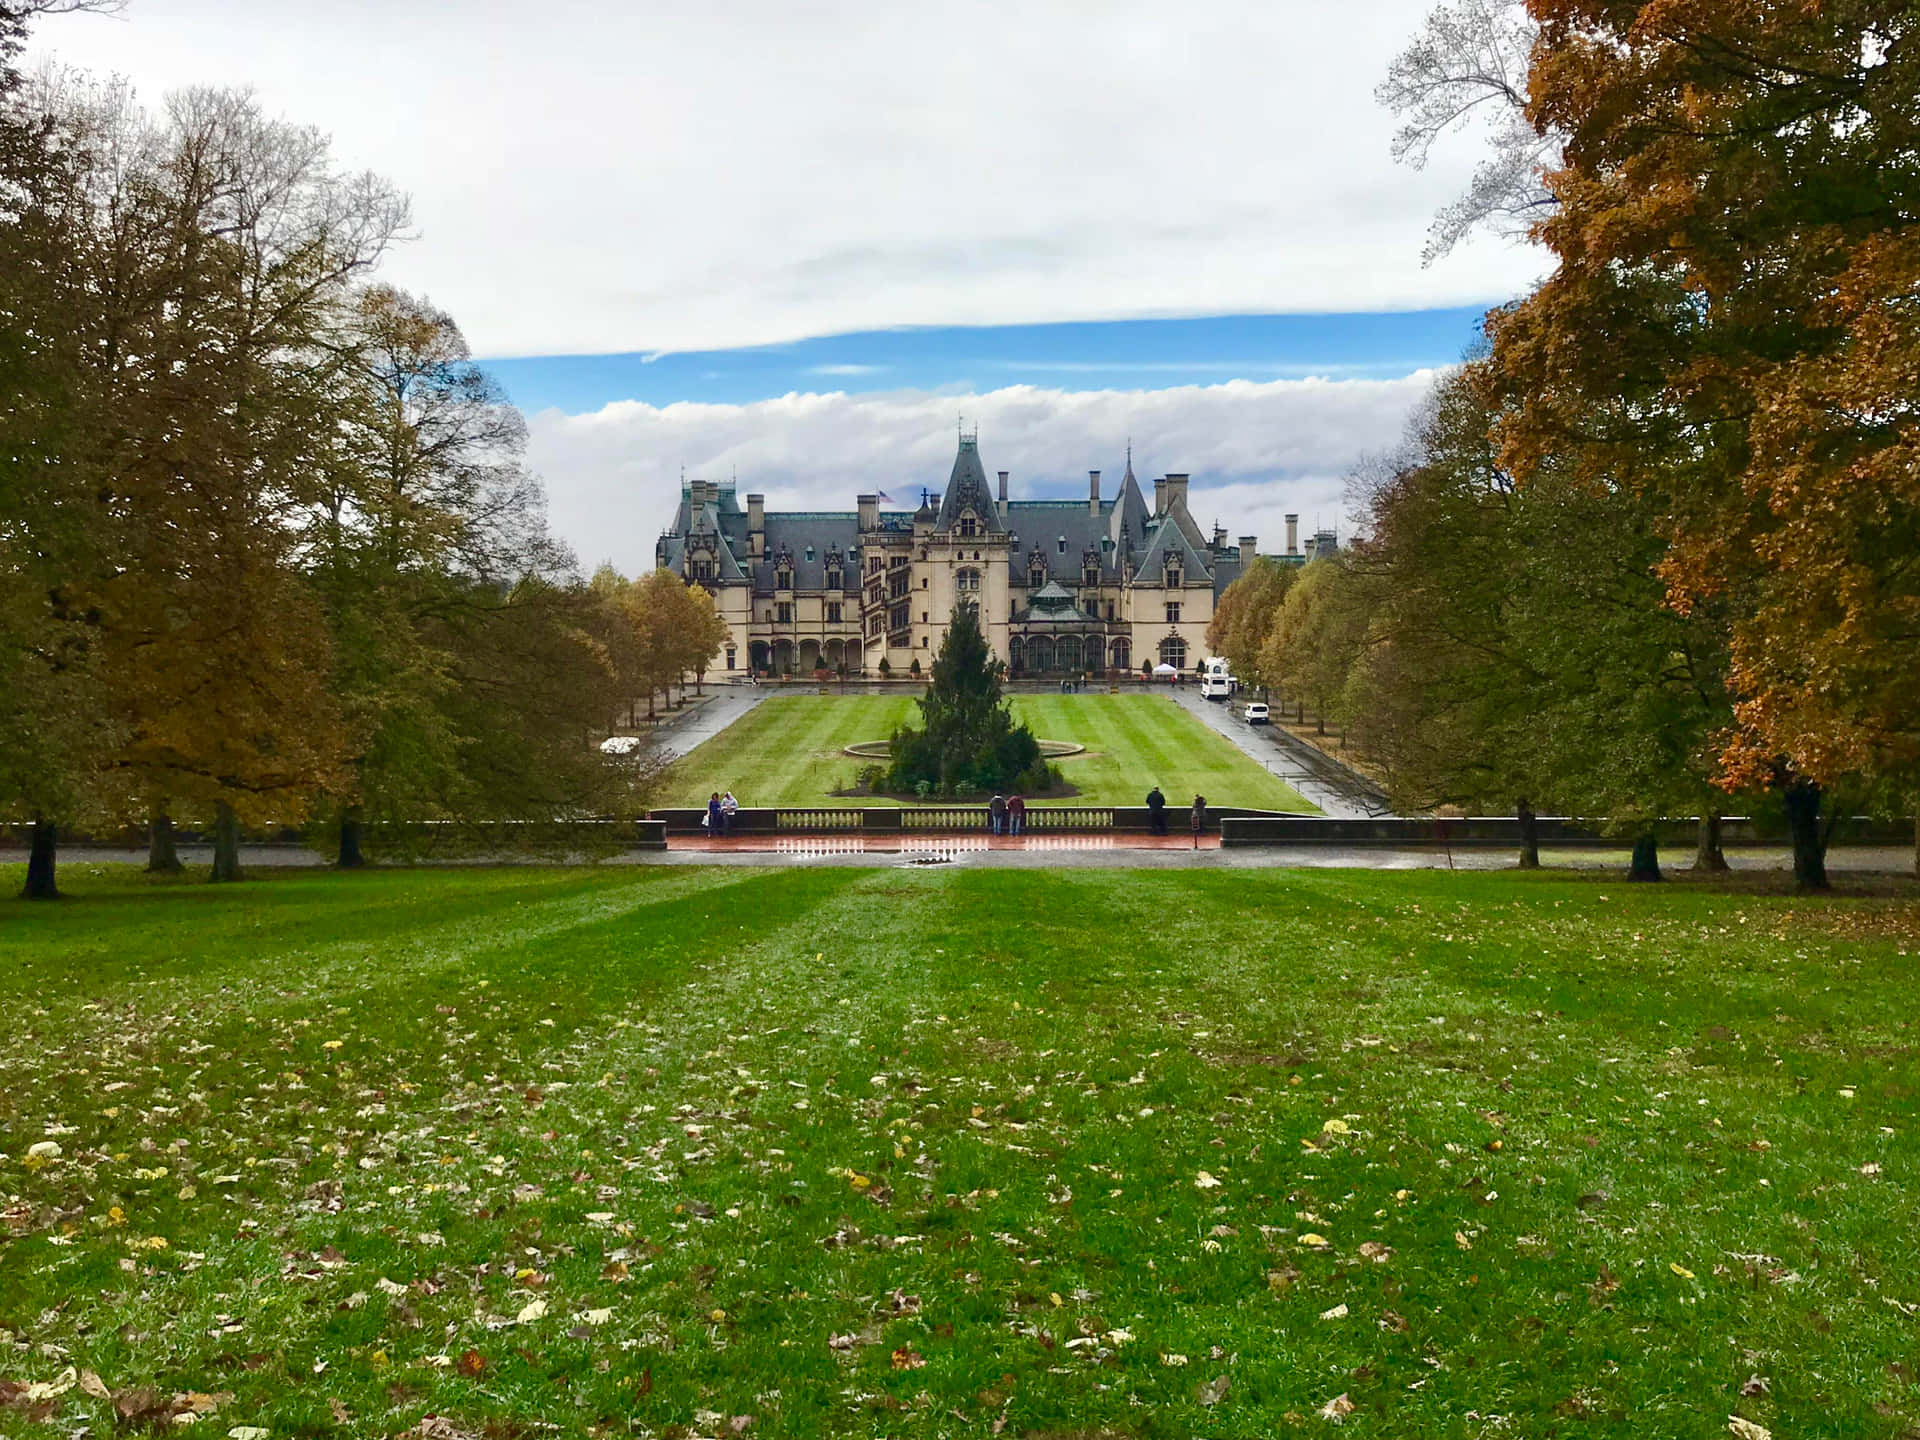 Enjoy the Magnificence of the Biltmore Estate